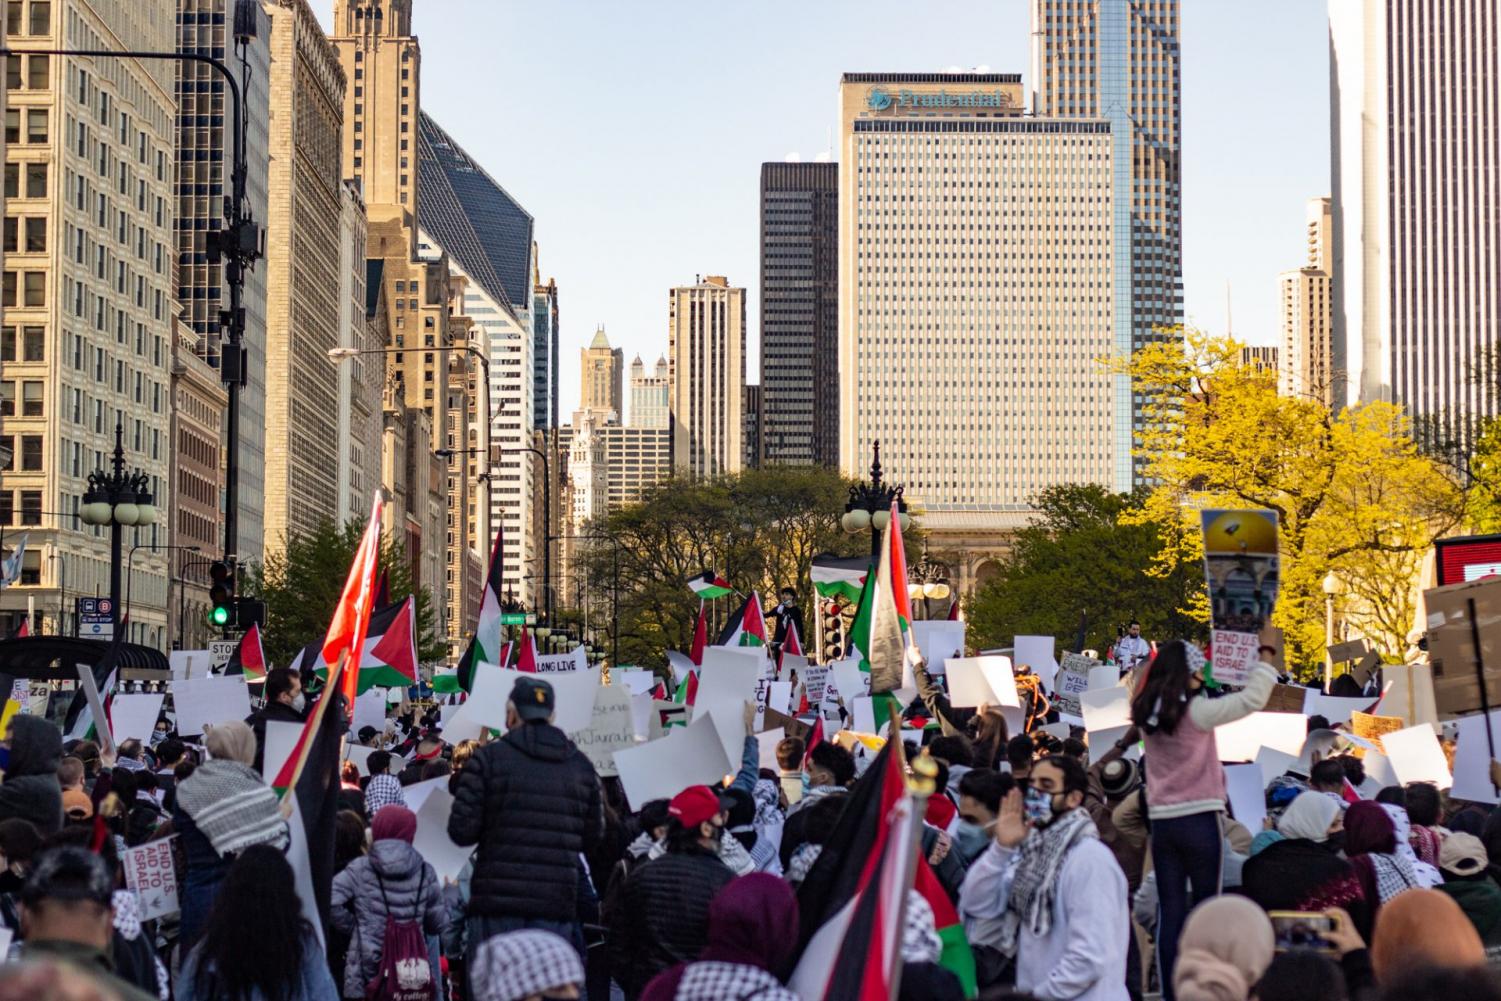 Thousands+participate+in+Sheik+Jarrah+rally+downtown+to+show+support+for+Palestinians+amid+ongoing+Israeli+apartheid